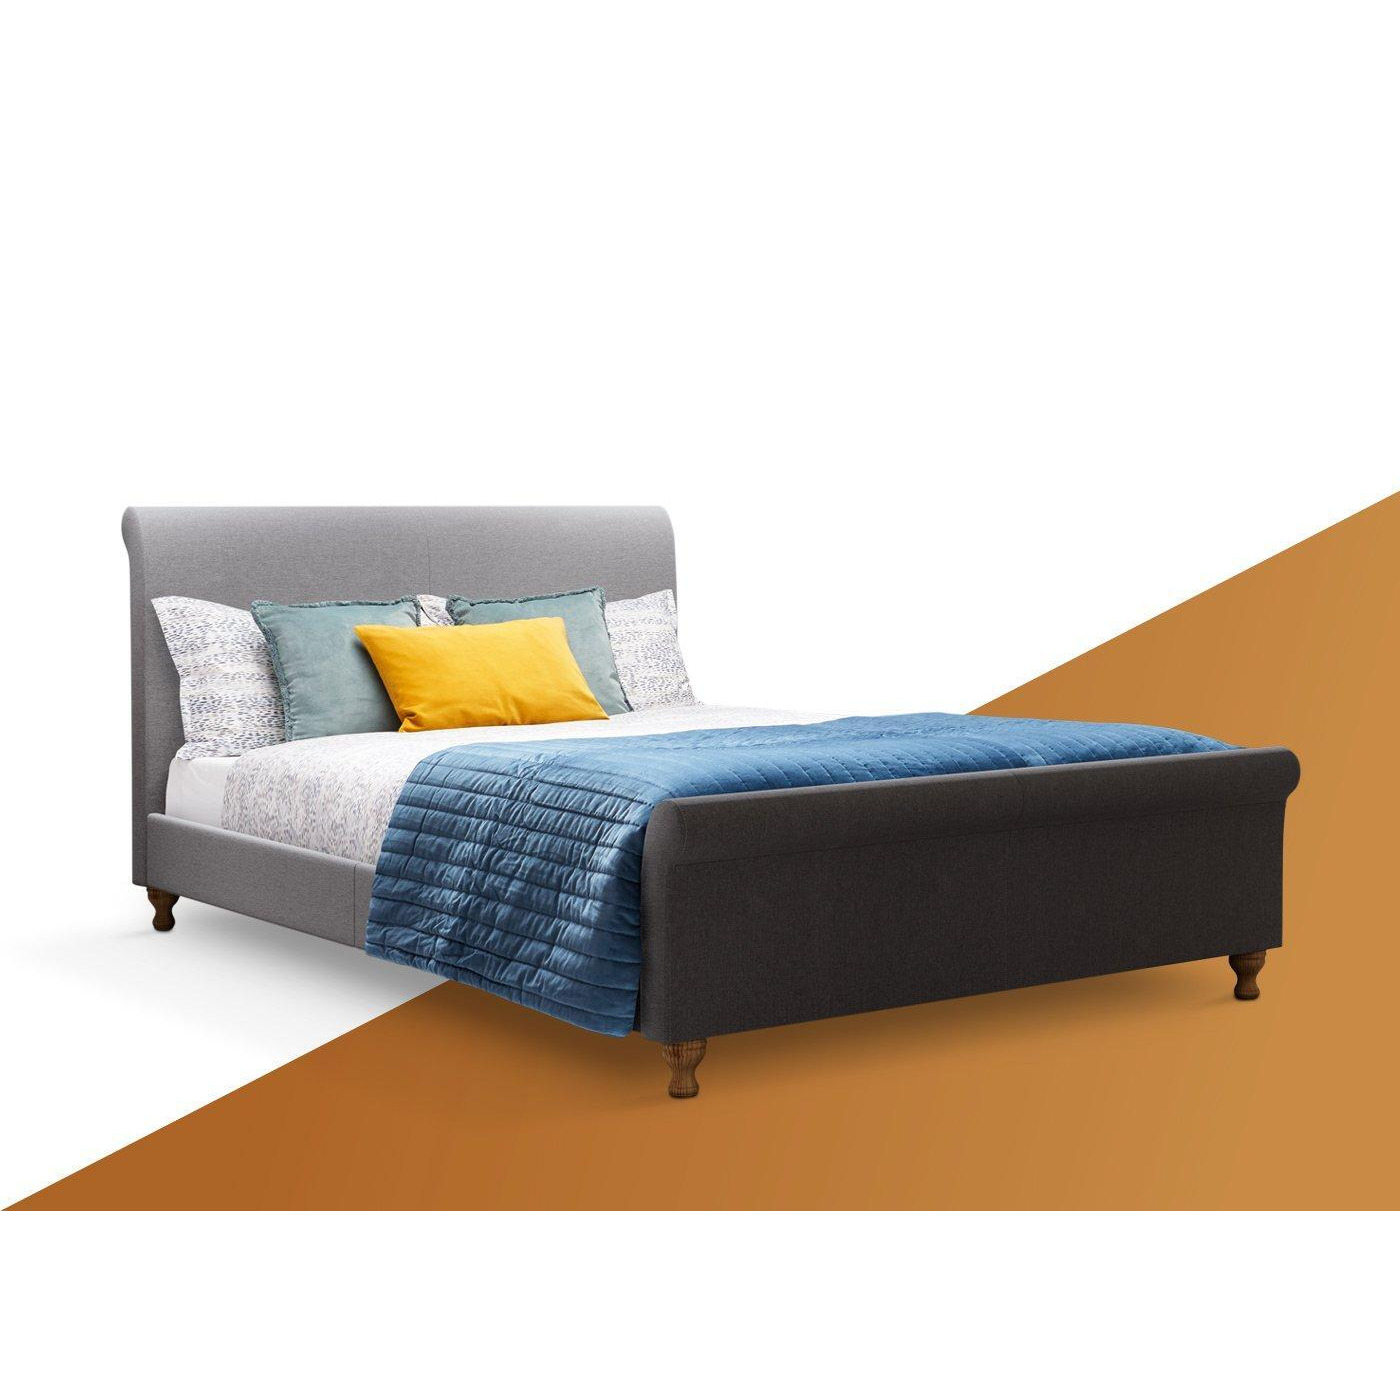 Marley Bed Frame - 4'6 Double - Grey